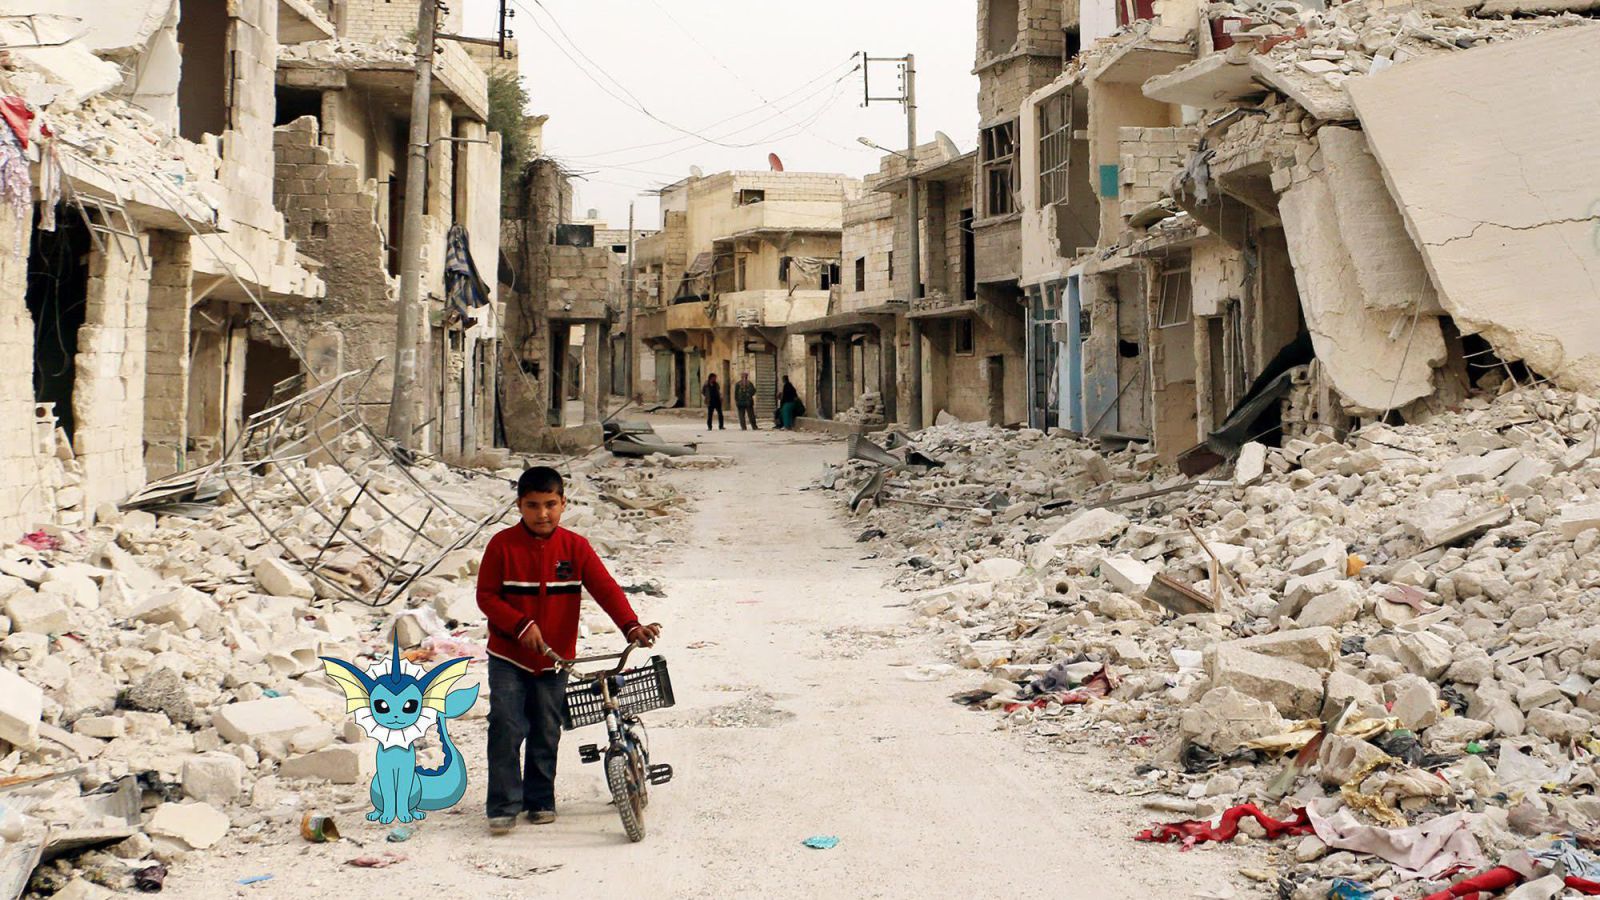 Activists invoke the Pokemon Go craze to draw attention to the plight of children in Syria.